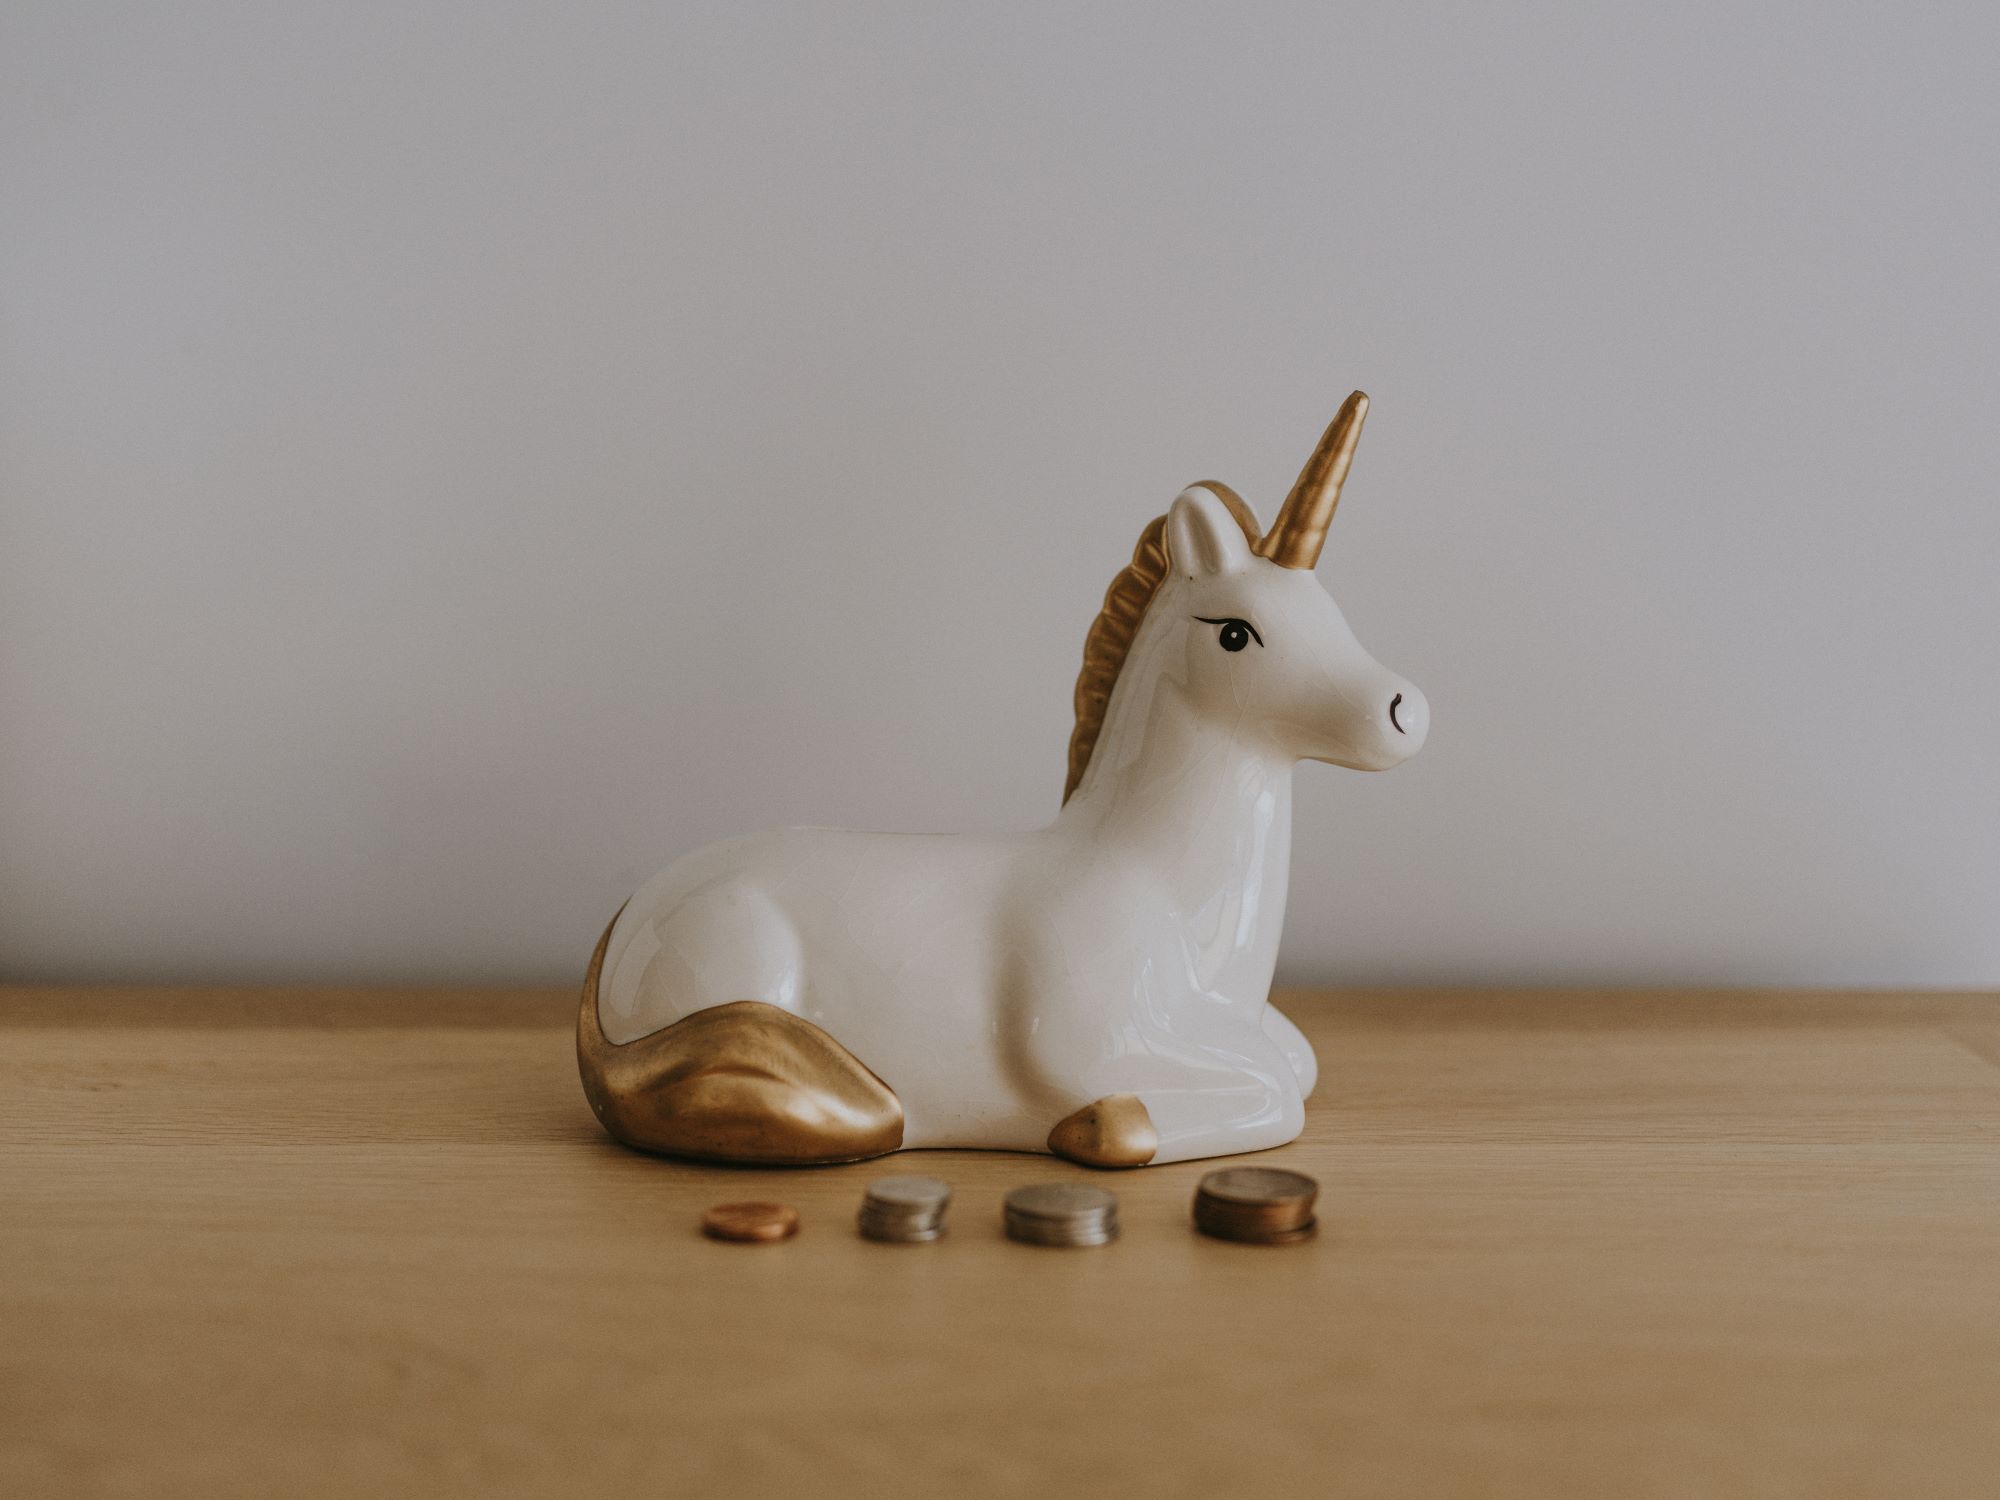 Pigg bank glass unicorn with coins next to it sitting on a desk